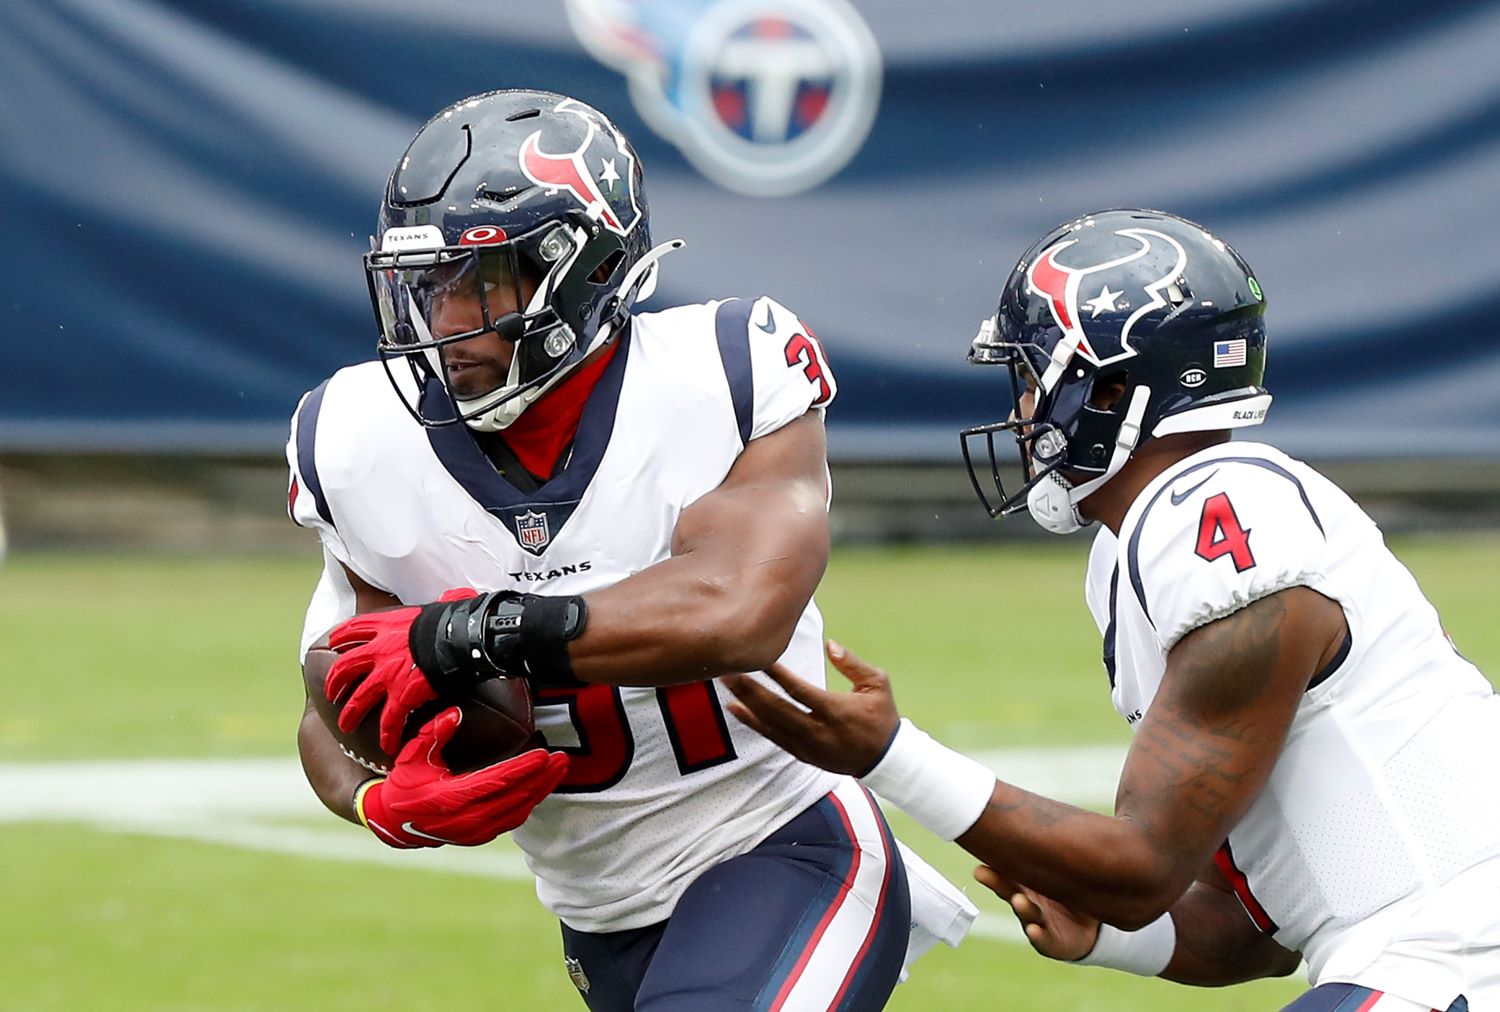 With running back David Johnson landing on injured reserve, the Houston Texans will rely on Duke Johnson to carry the load moving forward.